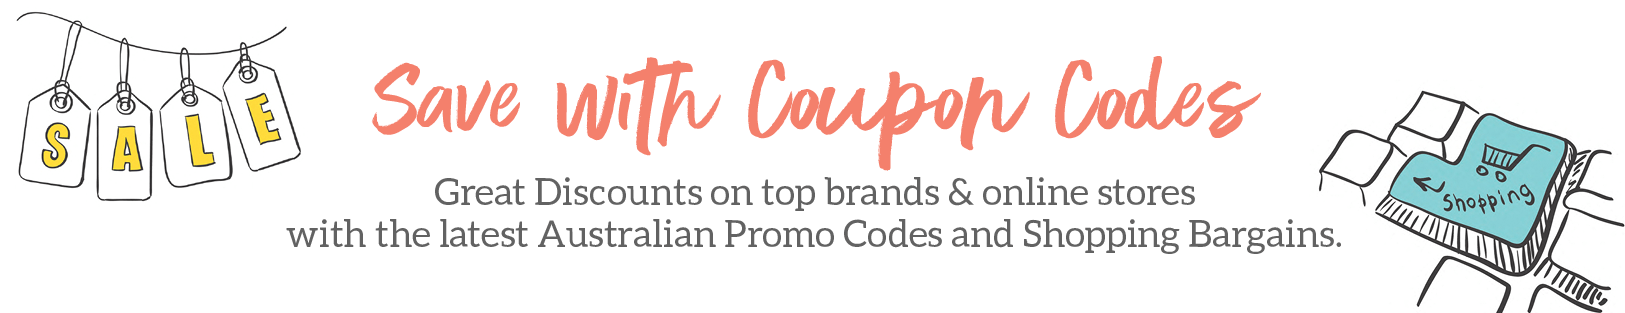 Catch Coupon Codes Coupons 20 Off In November 2020 The Organised Housewife